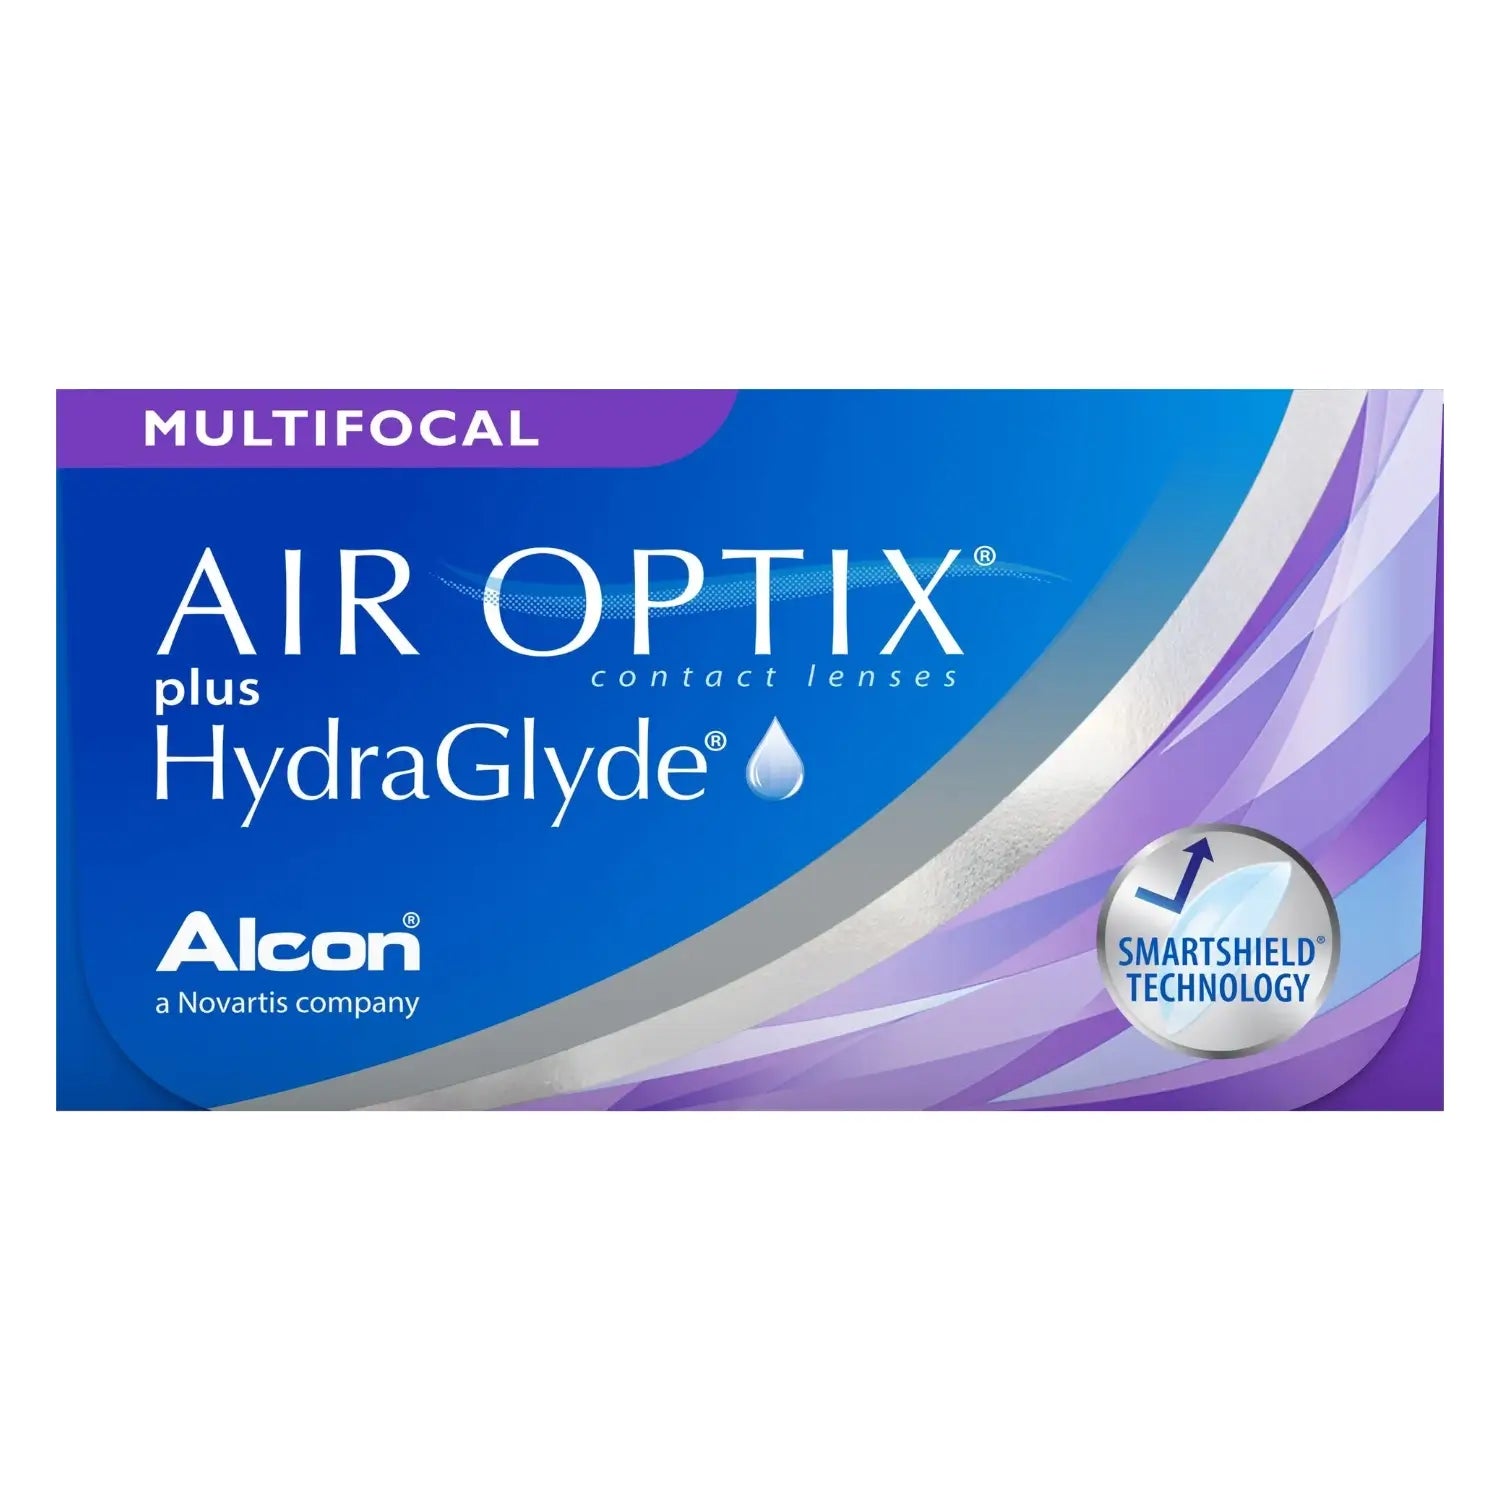 Certified Air Optix Multifocal Contact Lenses by Alcon on sale online at The Optical Co at the best prices